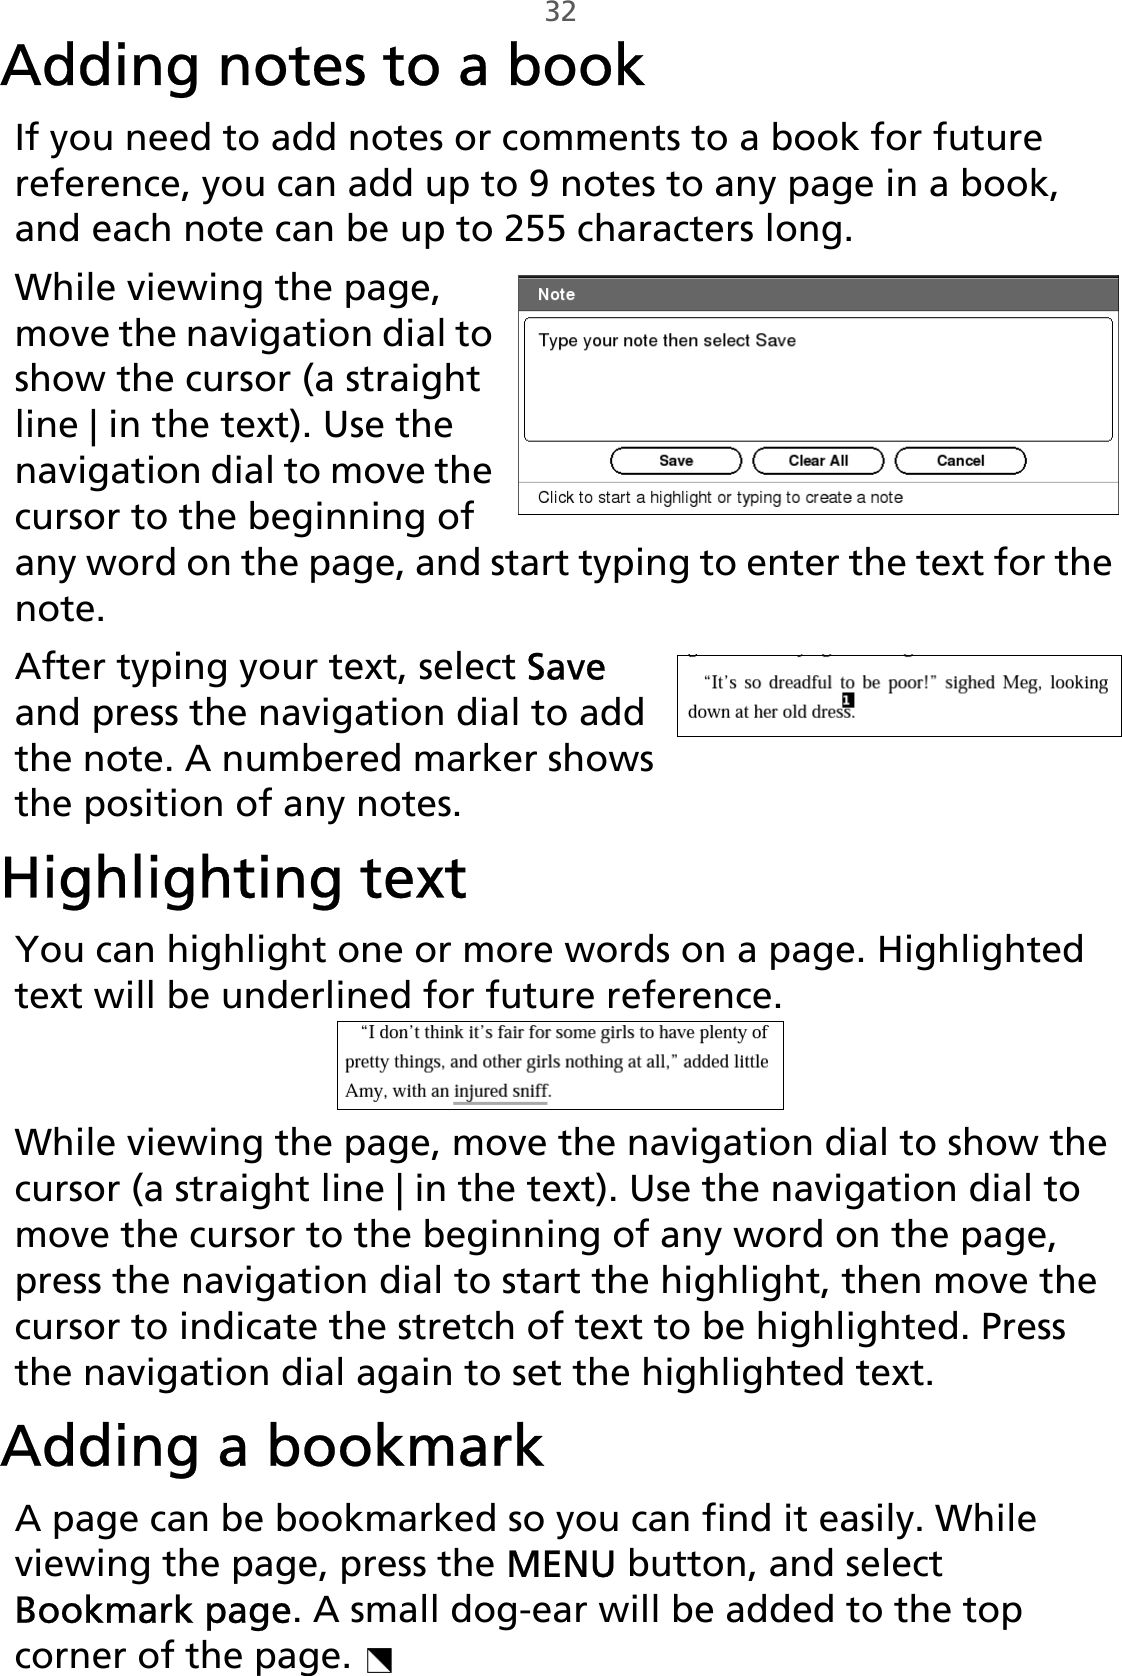 32Adding notes to a bookIf you need to add notes or comments to a book for future reference, you can add up to 9 notes to any page in a book, and each note can be up to 255 characters long.While viewing the page, move the navigation dial to show the cursor (a straight line | in the text). Use the navigation dial to move the cursor to the beginning of any word on the page, and start typing to enter the text for the note. After typing your text, select Save and press the navigation dial to add the note. A numbered marker shows the position of any notes.Highlighting textYou can highlight one or more words on a page. Highlighted text will be underlined for future reference. While viewing the page, move the navigation dial to show the cursor (a straight line | in the text). Use the navigation dial to move the cursor to the beginning of any word on the page, press the navigation dial to start the highlight, then move the cursor to indicate the stretch of text to be highlighted. Press the navigation dial again to set the highlighted text. Adding a bookmarkA page can be bookmarked so you can find it easily. While viewing the page, press the MENU button, and select Bookmark page. A small dog-ear will be added to the top corner of the page. 